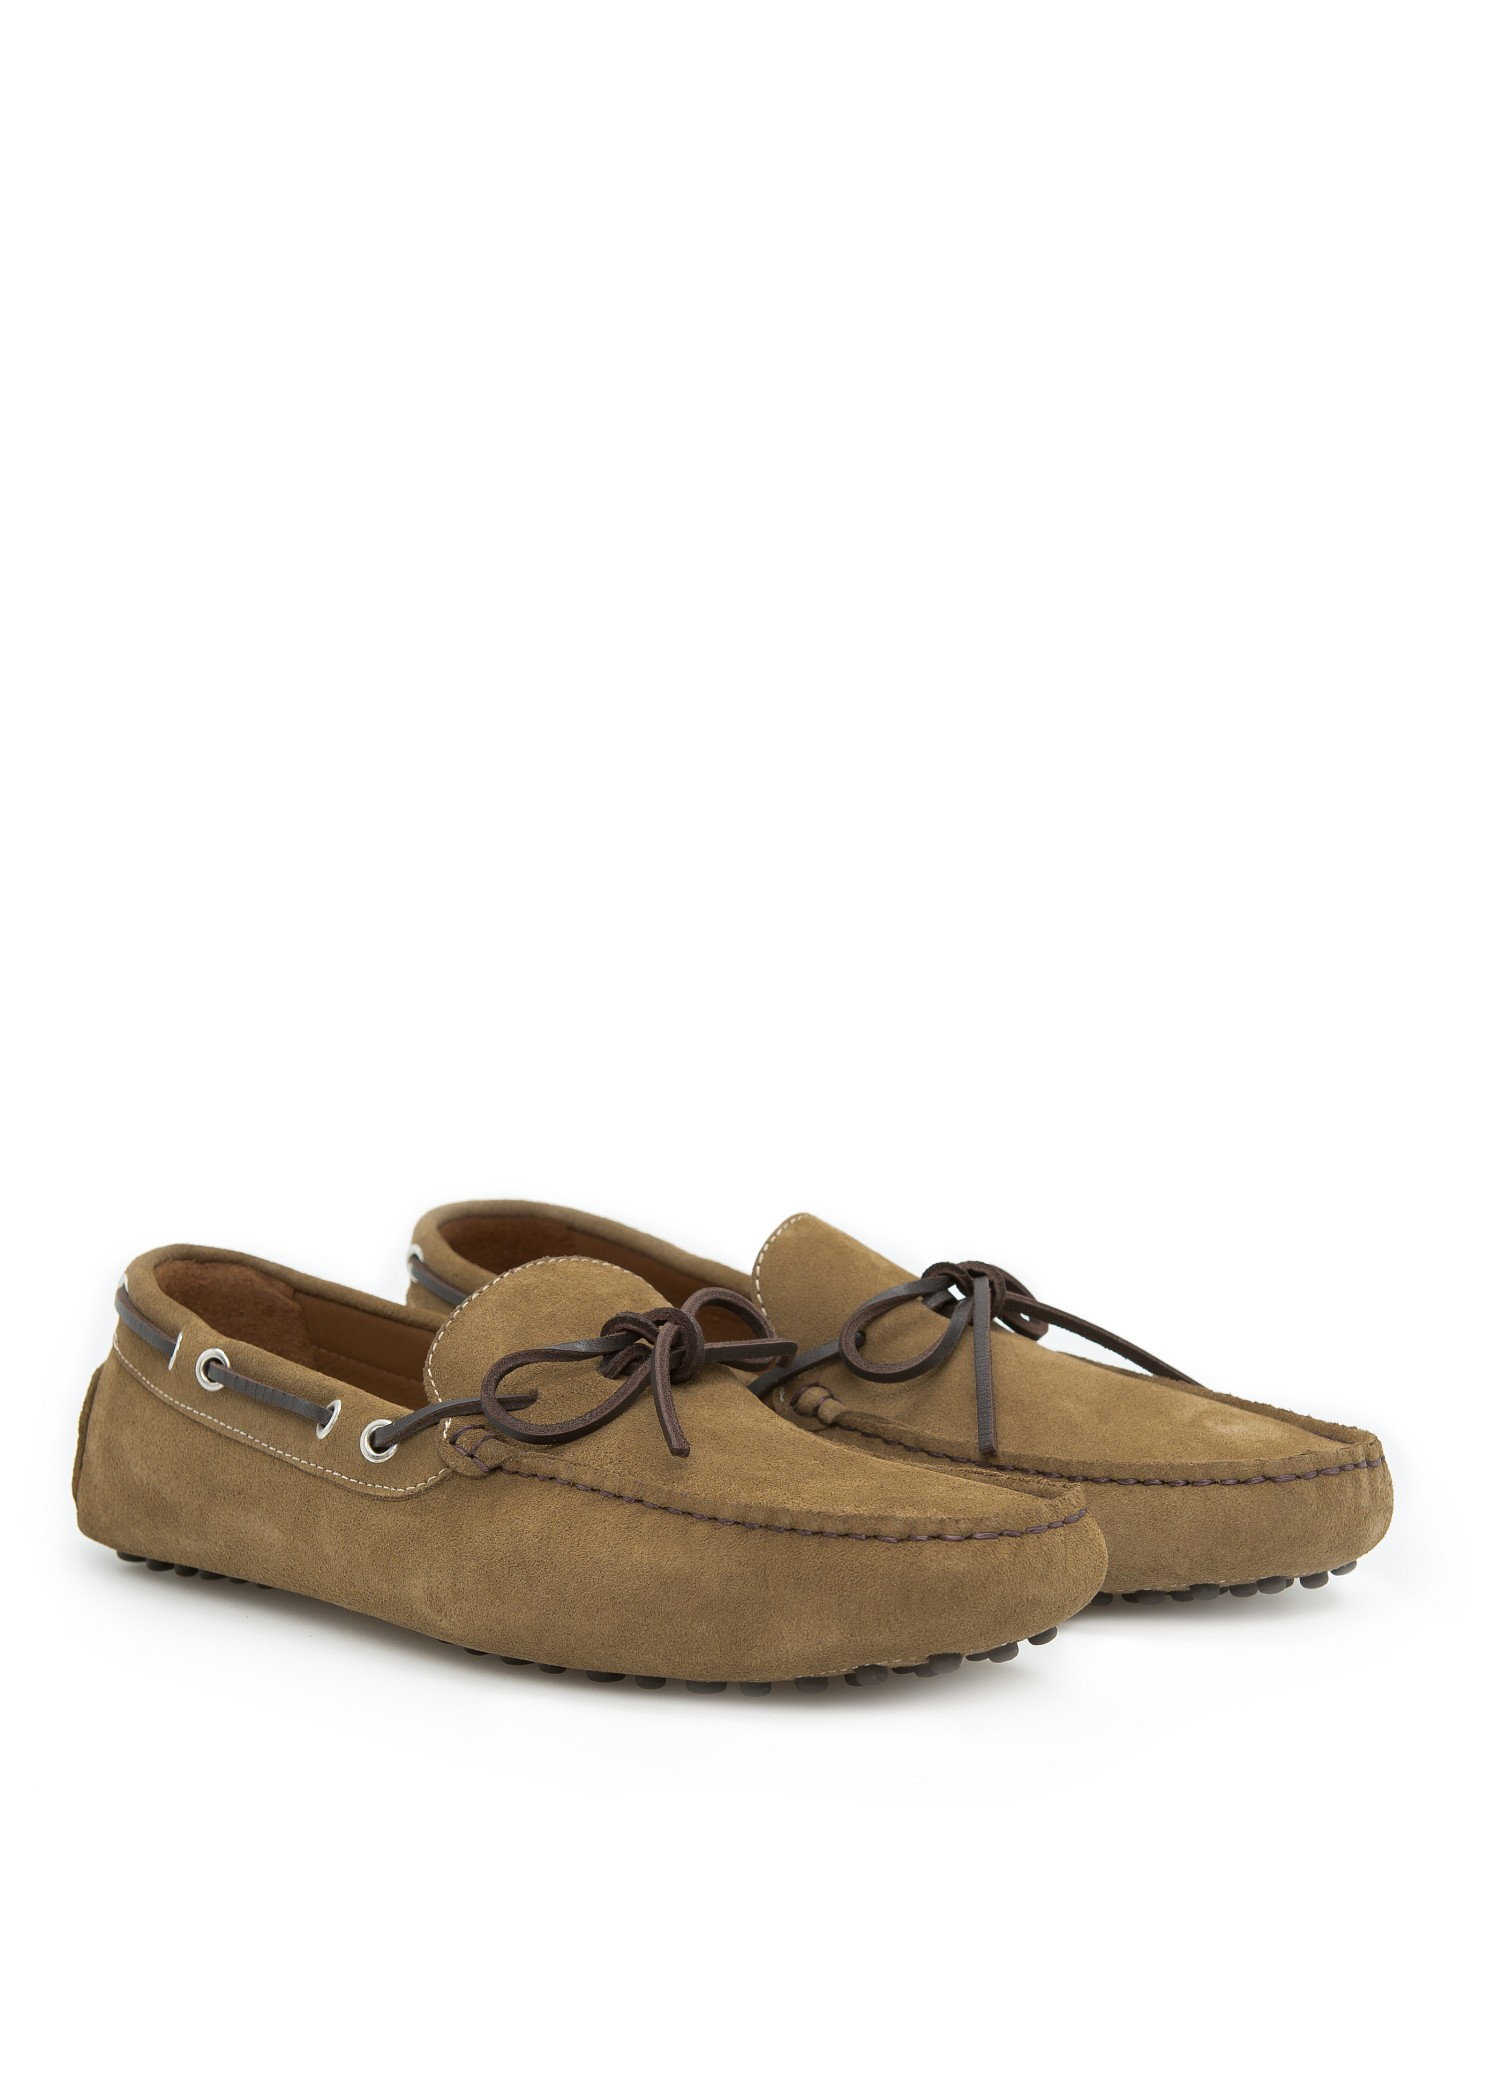 Lyst - Mango Suede Driving Shoes in Brown for Men